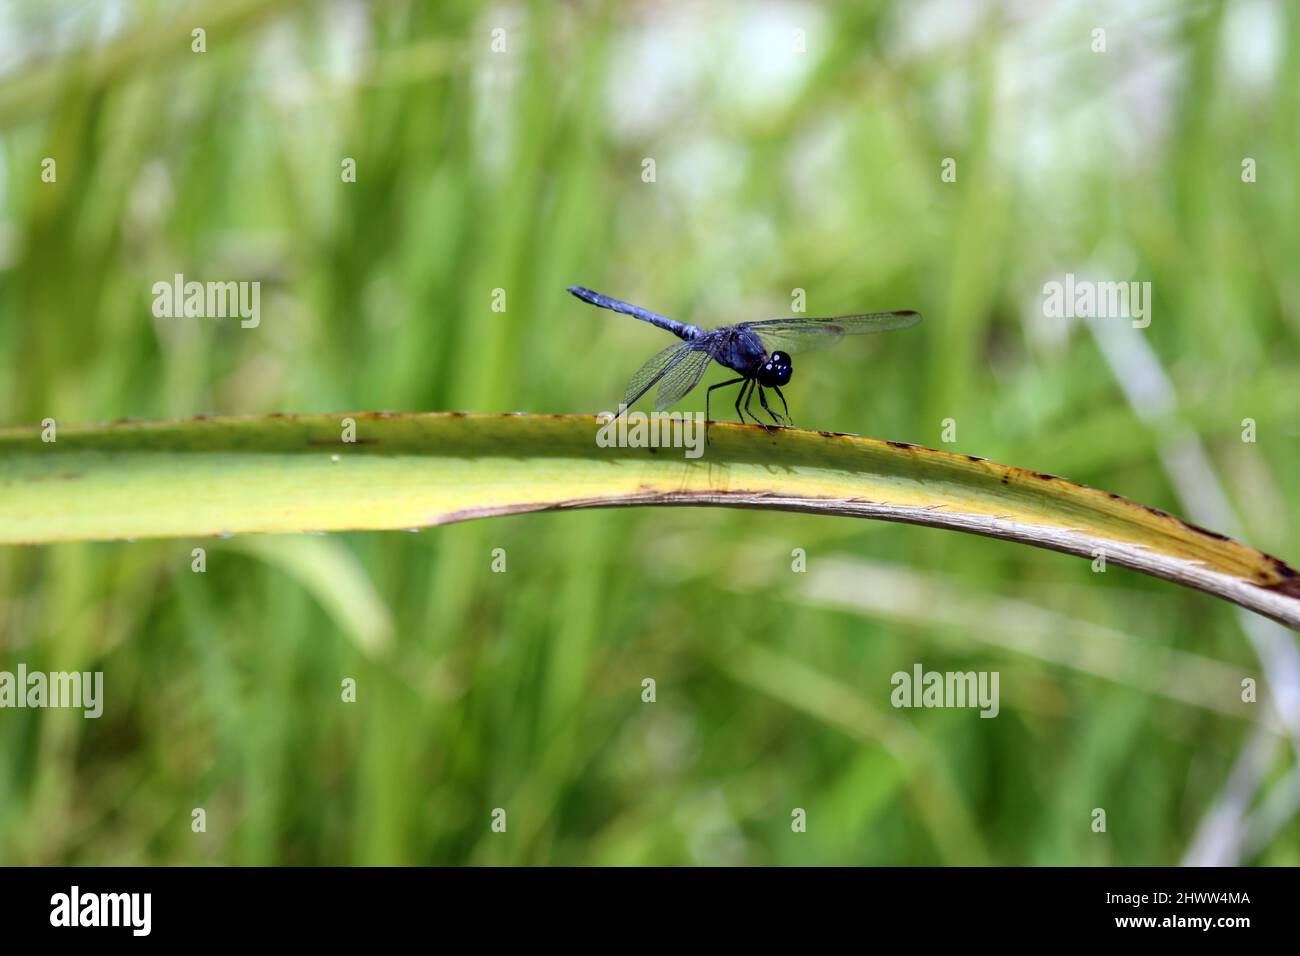 Closeup of a dragonfly after landing. The photo is a top-down view, Its wings are transparent blue. The landing was on a bush beside a river. Stock Photo